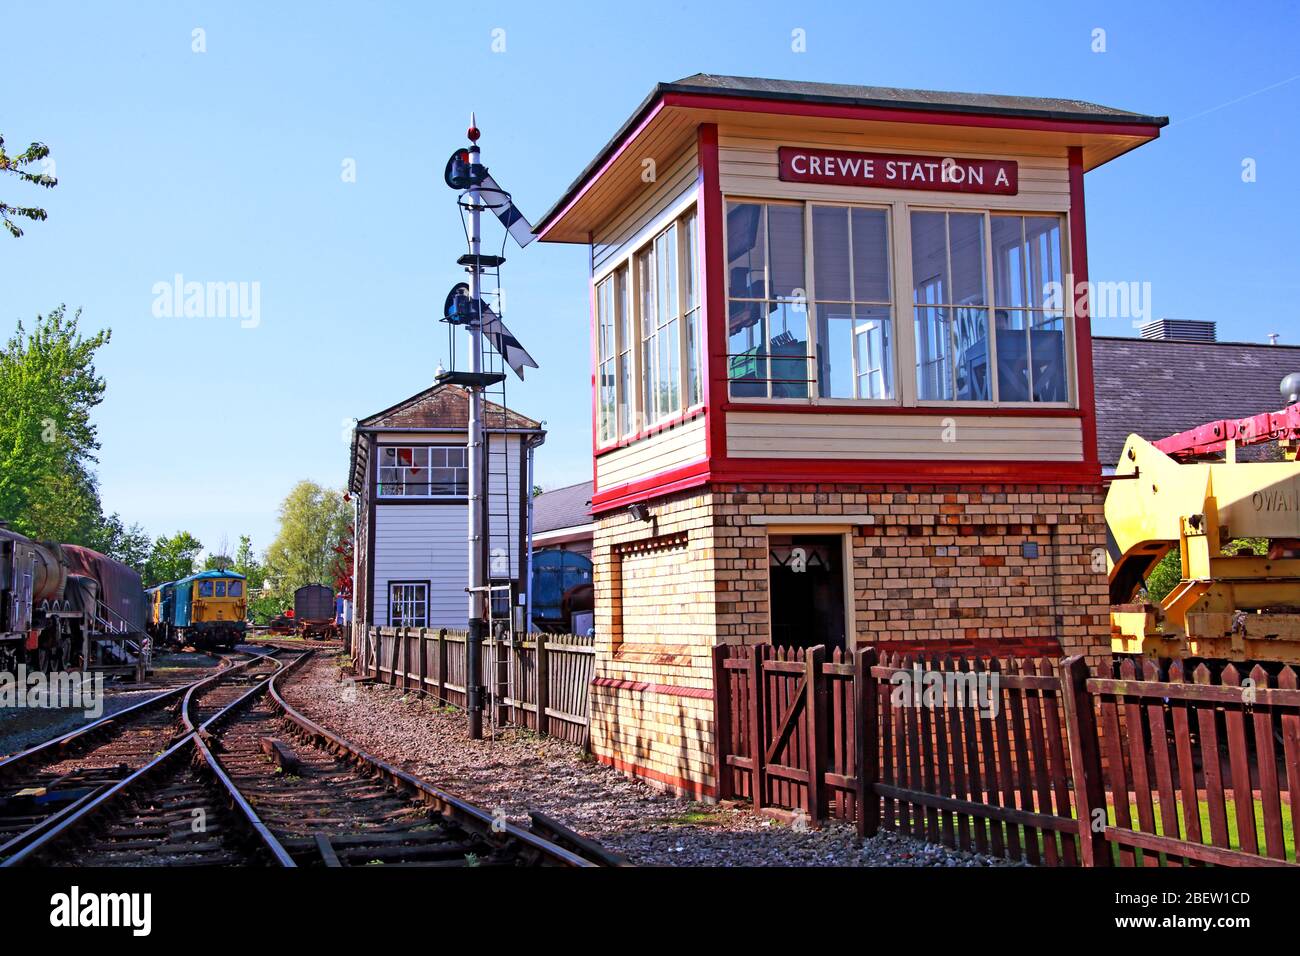 Crewe Station A, Signal Box from 1985 and siding, Cheshire,England, UK, CW1 Stock Photo